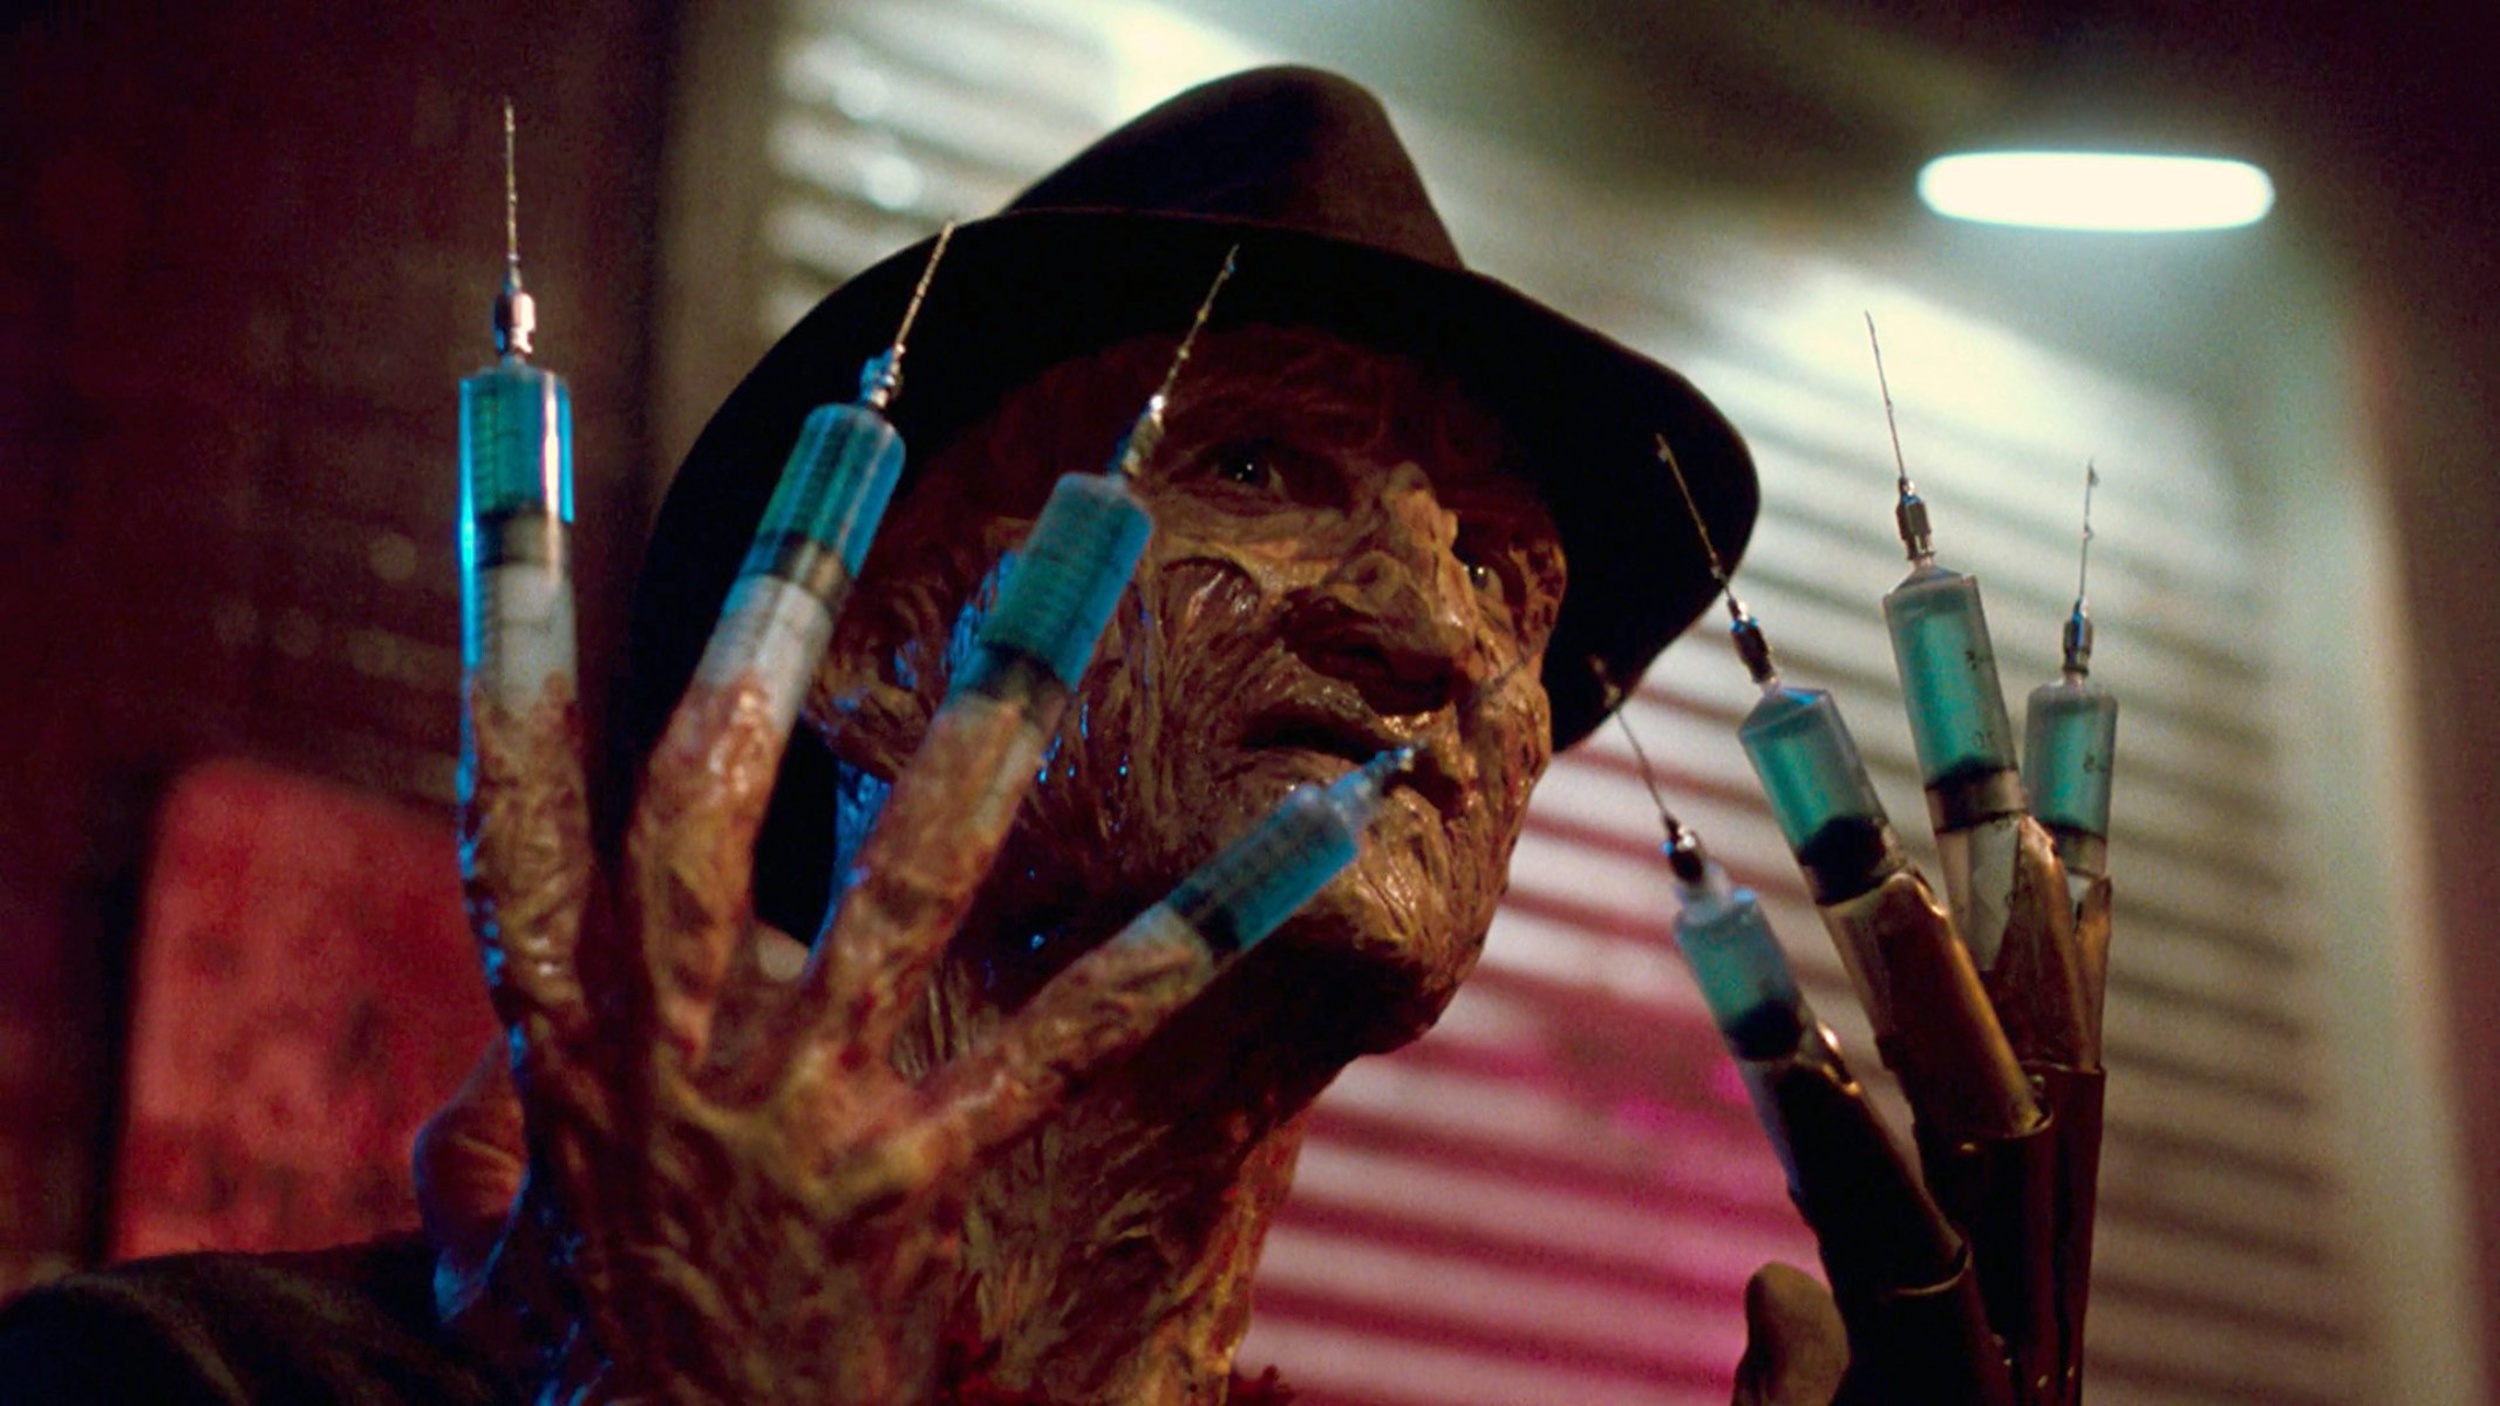 <p>The 1980s’ quasi-respectable slasher franchise kicked off with Wes Craven’s all-timer and then got bold — though very few critics picked up on it at the time — with “Freddy’s Revenge," which centers on a protagonist who’s struggling with his repressed homosexuality. “A Nightmare on Elm Street 3: Dream Warriors” brought in up-and-comers Chuck Russell and Frank Darabont to work a more conventional, almost superhero-esque riff on the sub-genre, while Renny Harlin’s “A Nightmare on Elm Street 4: The Dream Master” cemented Freddy Krueger’s persona as a quippy beast. The series stalled out until Craven returned for the daringly meta 1994’s “New Nightmare." The 2010 Platinum Dunes remake is an abomination.</p><p><a href='https://www.msn.com/en-us/community/channel/vid-cj9pqbr0vn9in2b6ddcd8sfgpfq6x6utp44fssrv6mc2gtybw0us'>Follow us on MSN to see more of our exclusive entertainment content.</a></p>